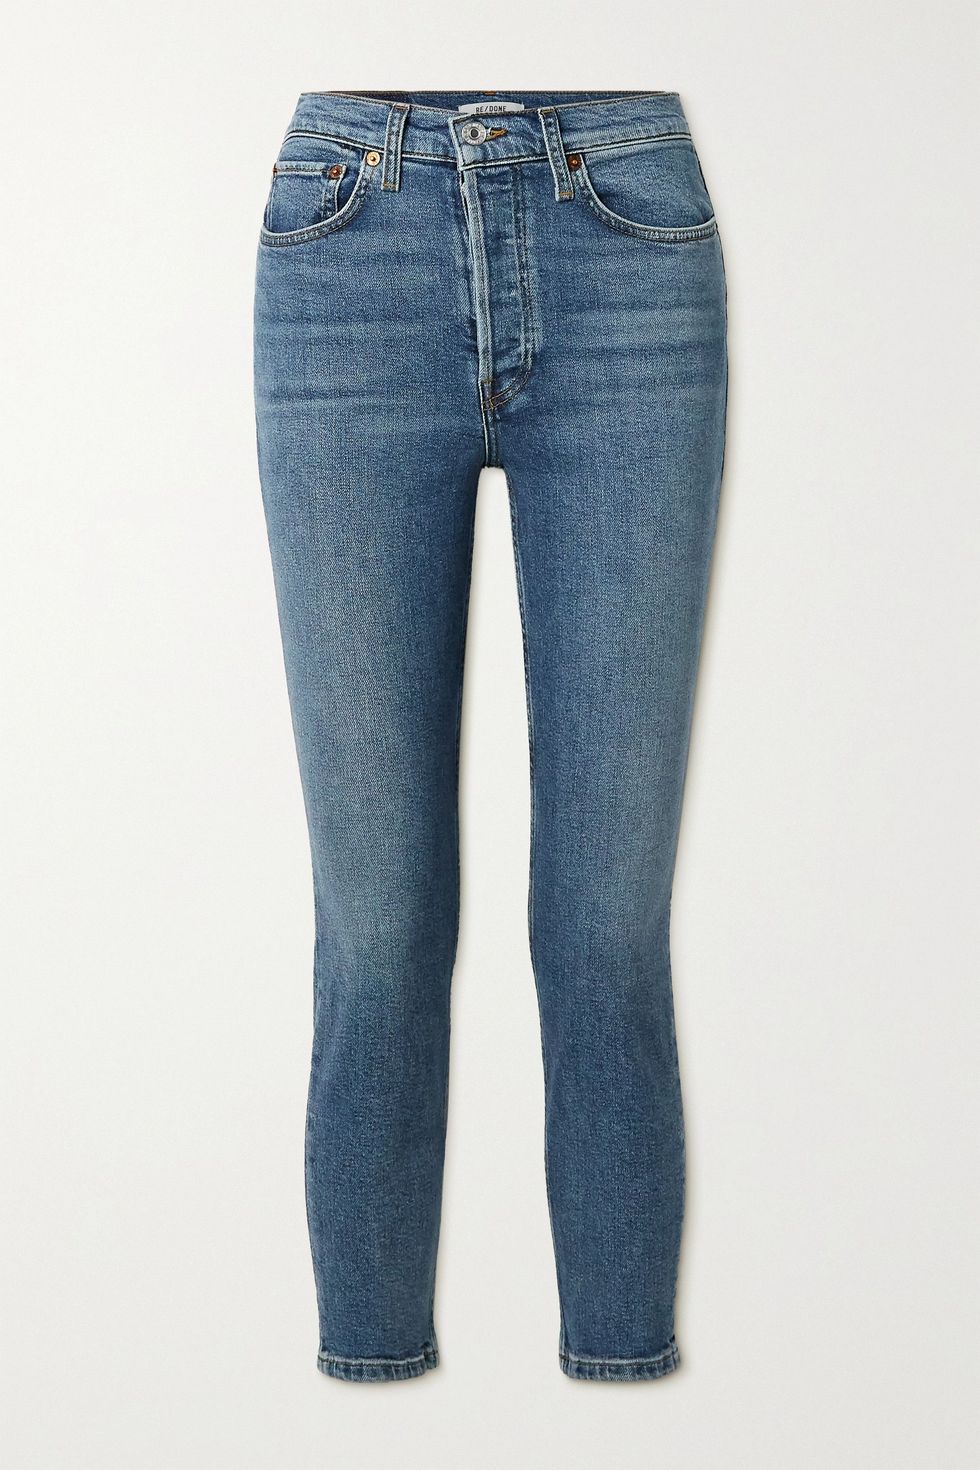 90s Comfort Stretch High-Rise Ankle Crop Skinny Jeans